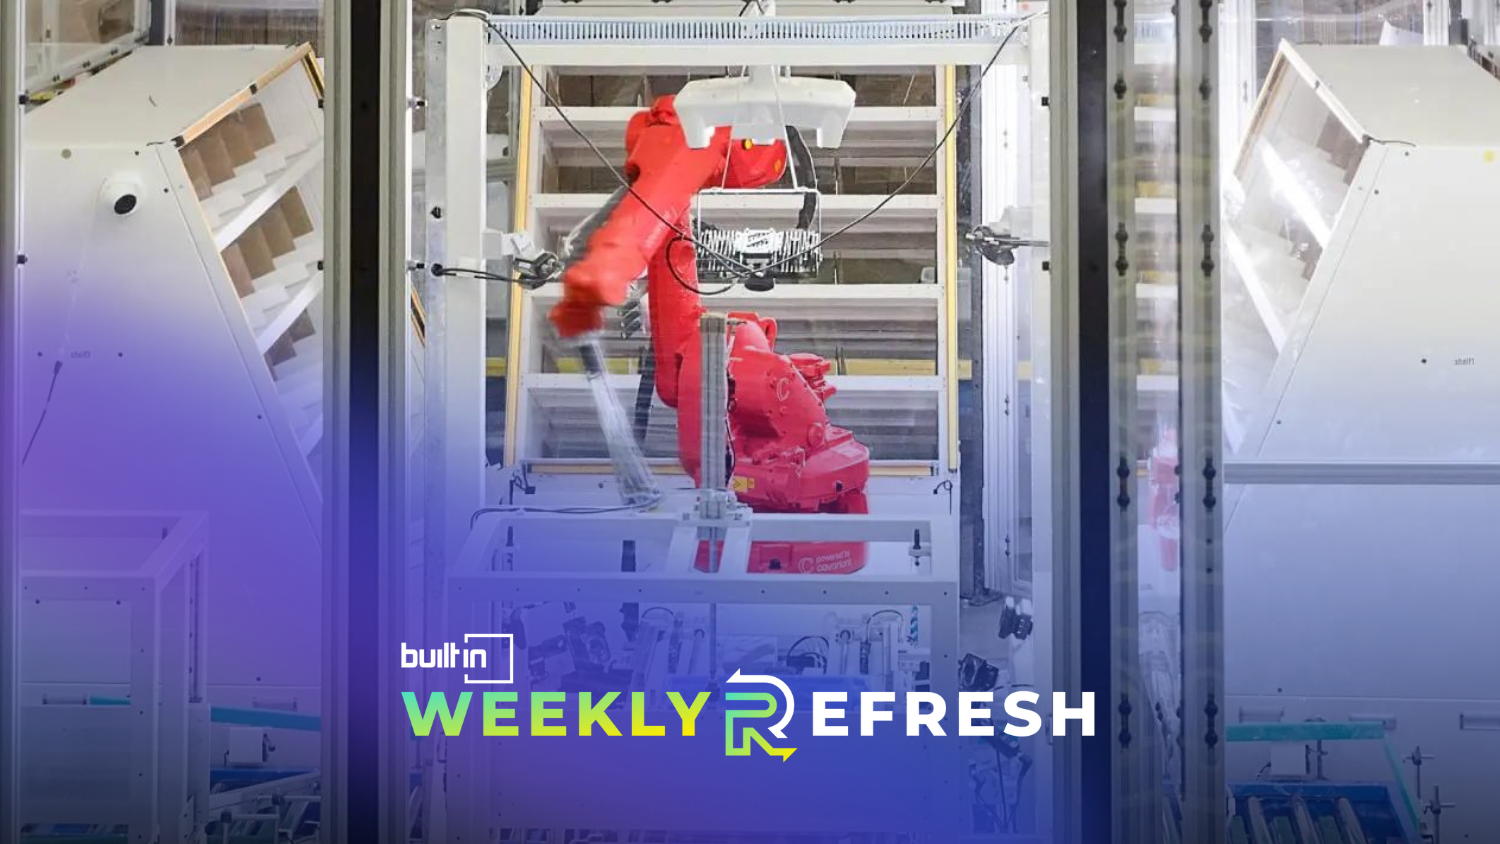 A Covariant robotic arm with the Built In San Francisco Weekly Refresh logo in the foreground.